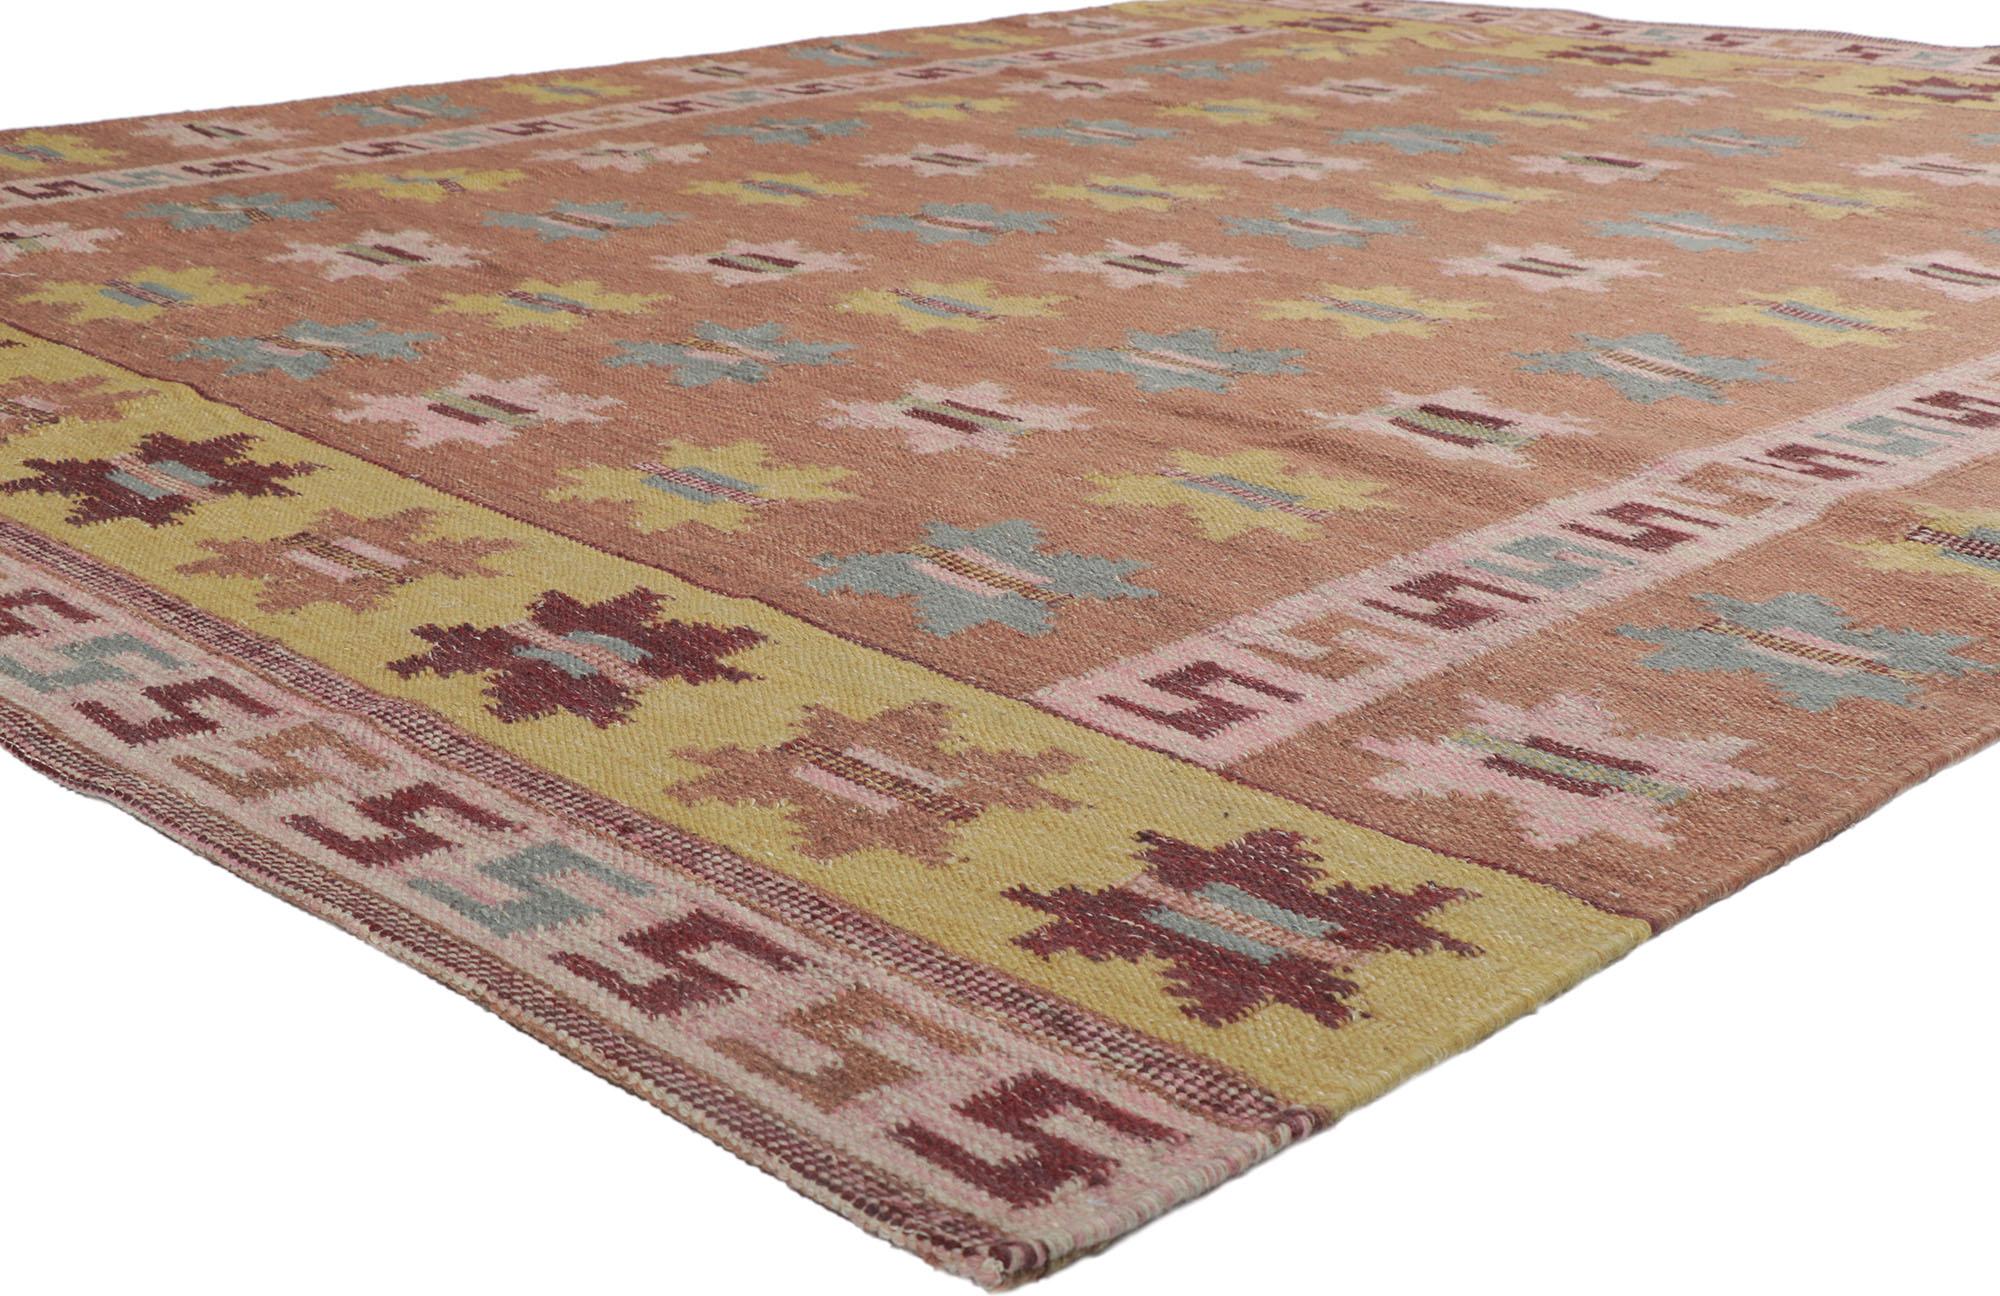 30679 New Scandinavian Swedish style Kilim rug Inspired by Marta Maas-Fjetterstrom 08'11 x 11'02. With its simplicity, geometric design and soft colors, this hand-woven wool Swedish inspired Kilim rug is a vision of woven beauty. The abrashed rust